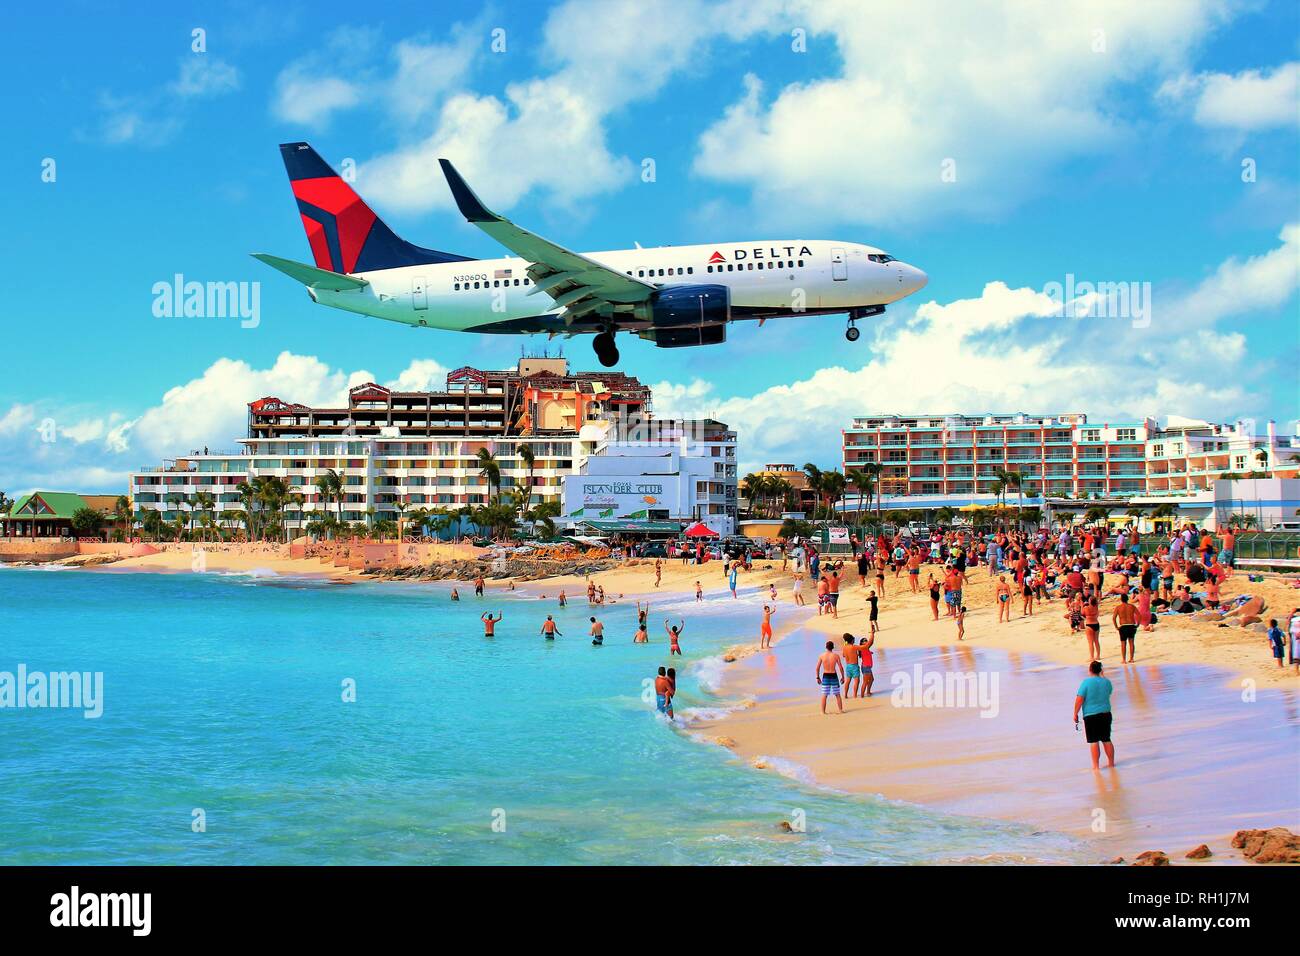 Maho Beach, Sint Maarten, Caribbean - February 27th 2018: A Delta Air Lines plane flies low over the famous Maho beach before landing at SXM airport. Stock Photo